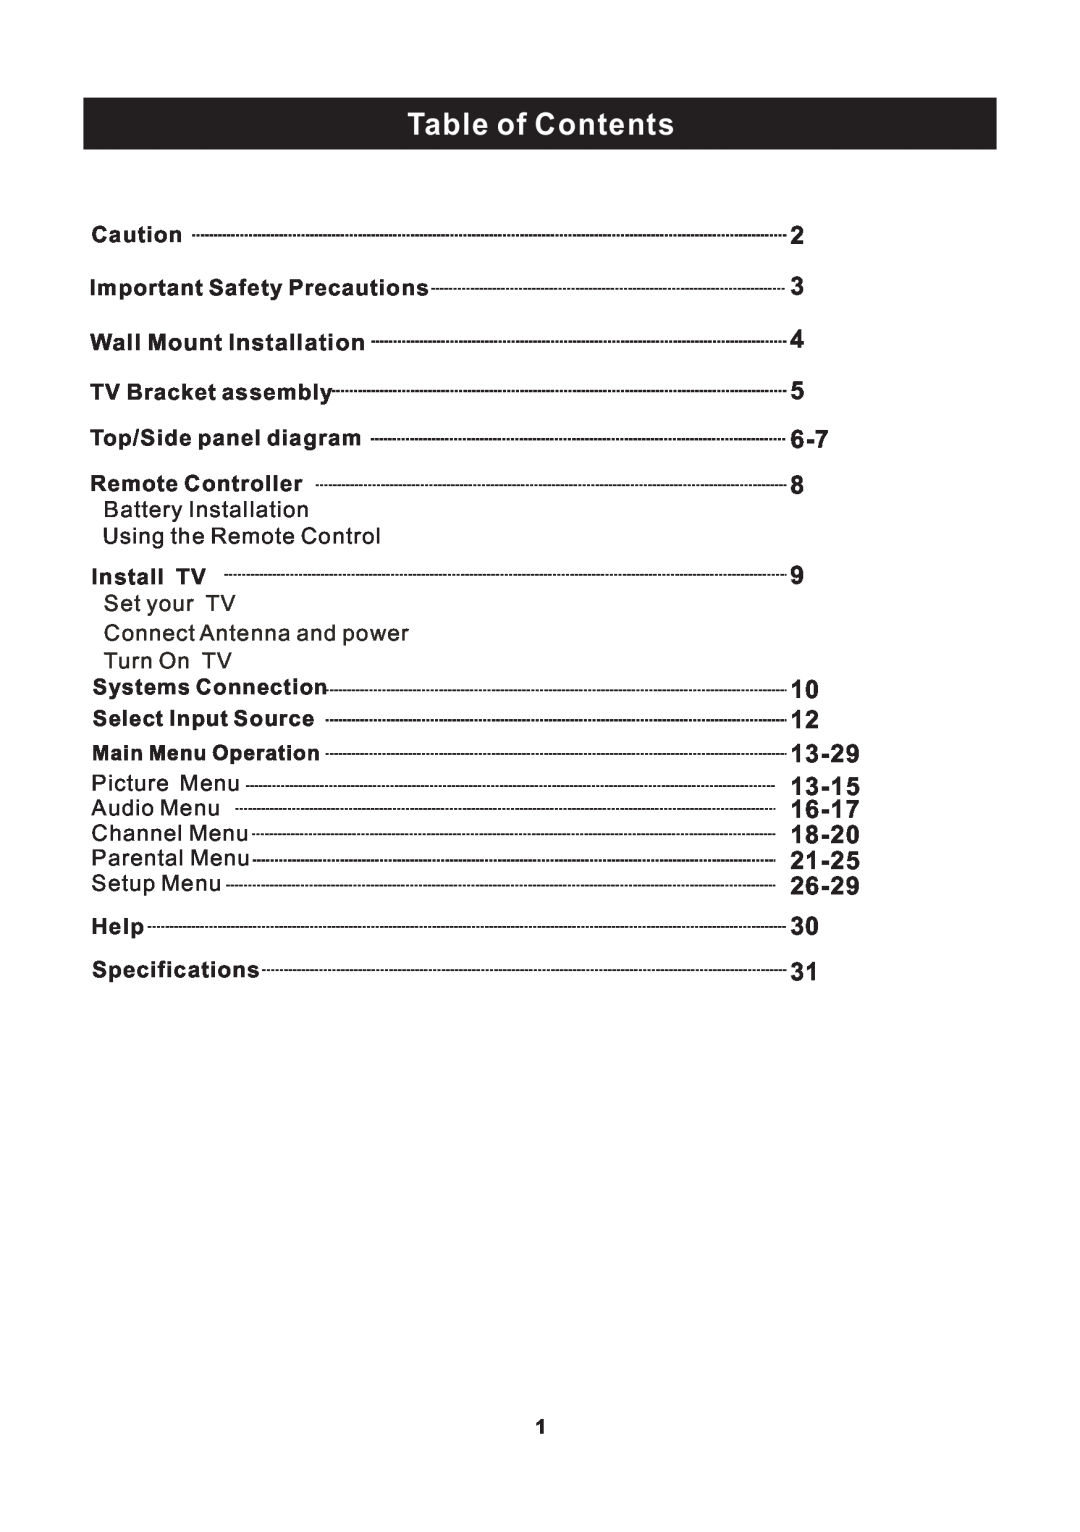 ProScan RLED2445A-B instruction manual Table of Contents, 13-29, 13-15, 16-17, 18-20, 21-25, 26-29 